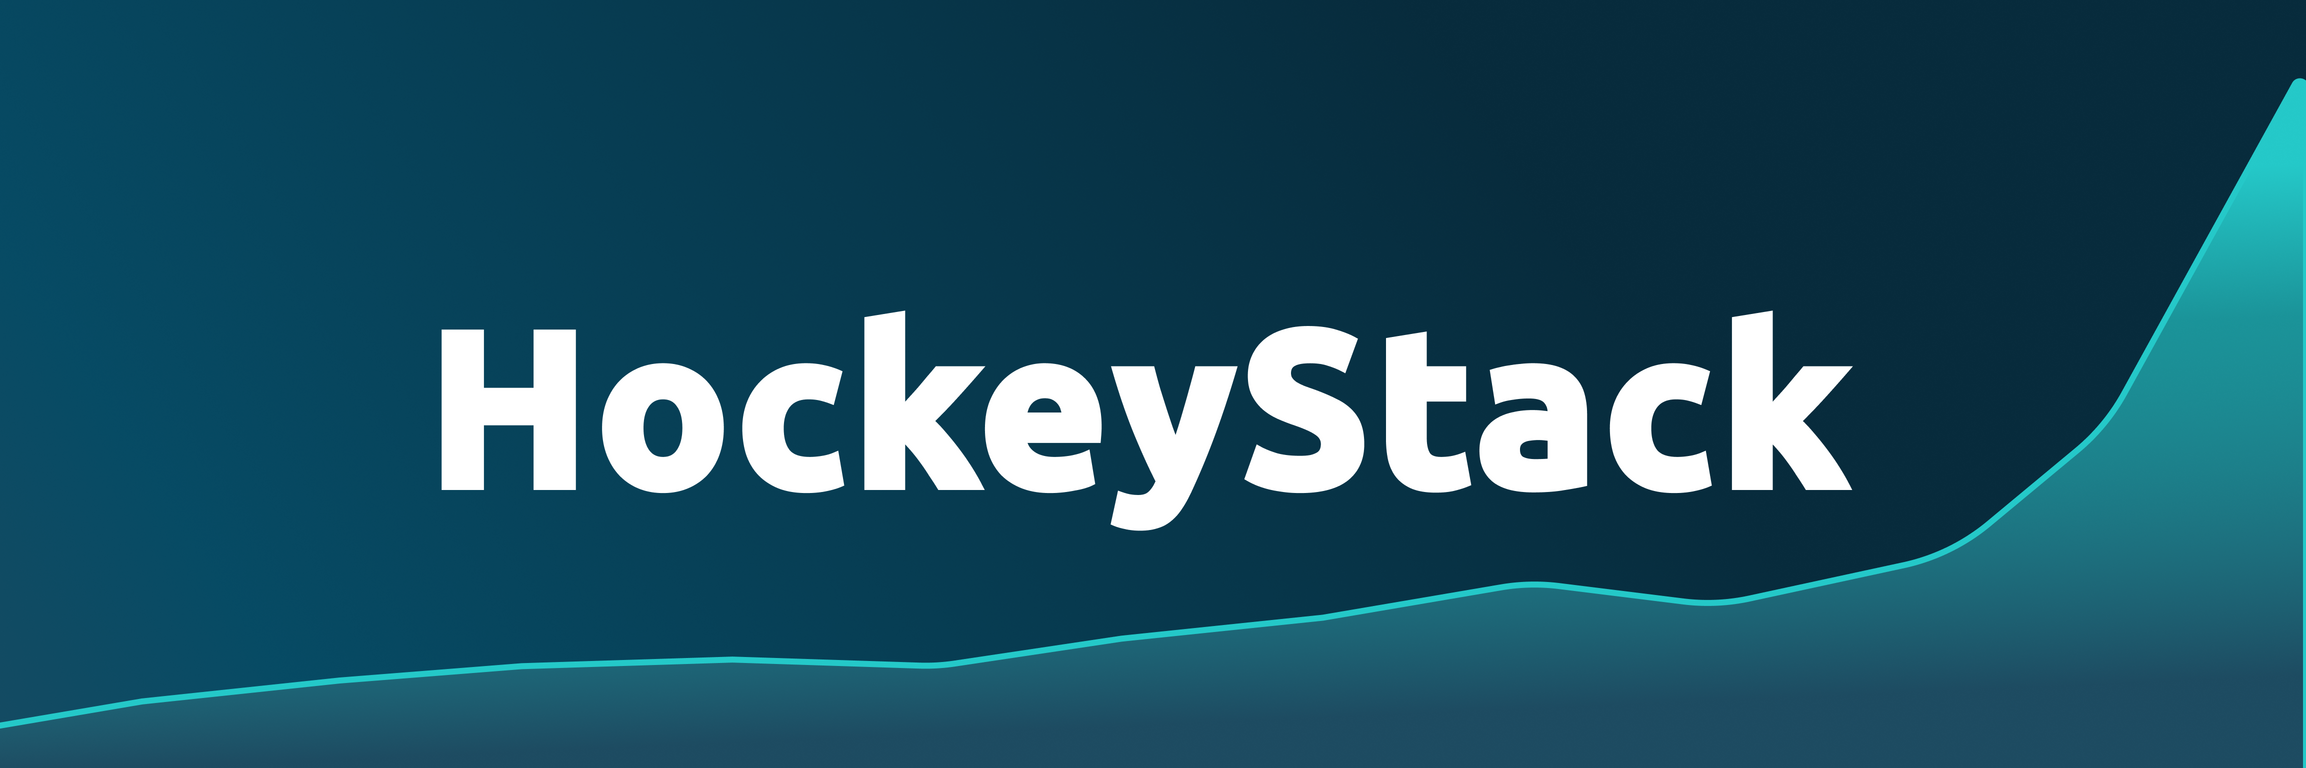 How A Mid-Sized SaaS Used HockeyStack To Increase Upgrades By 13%